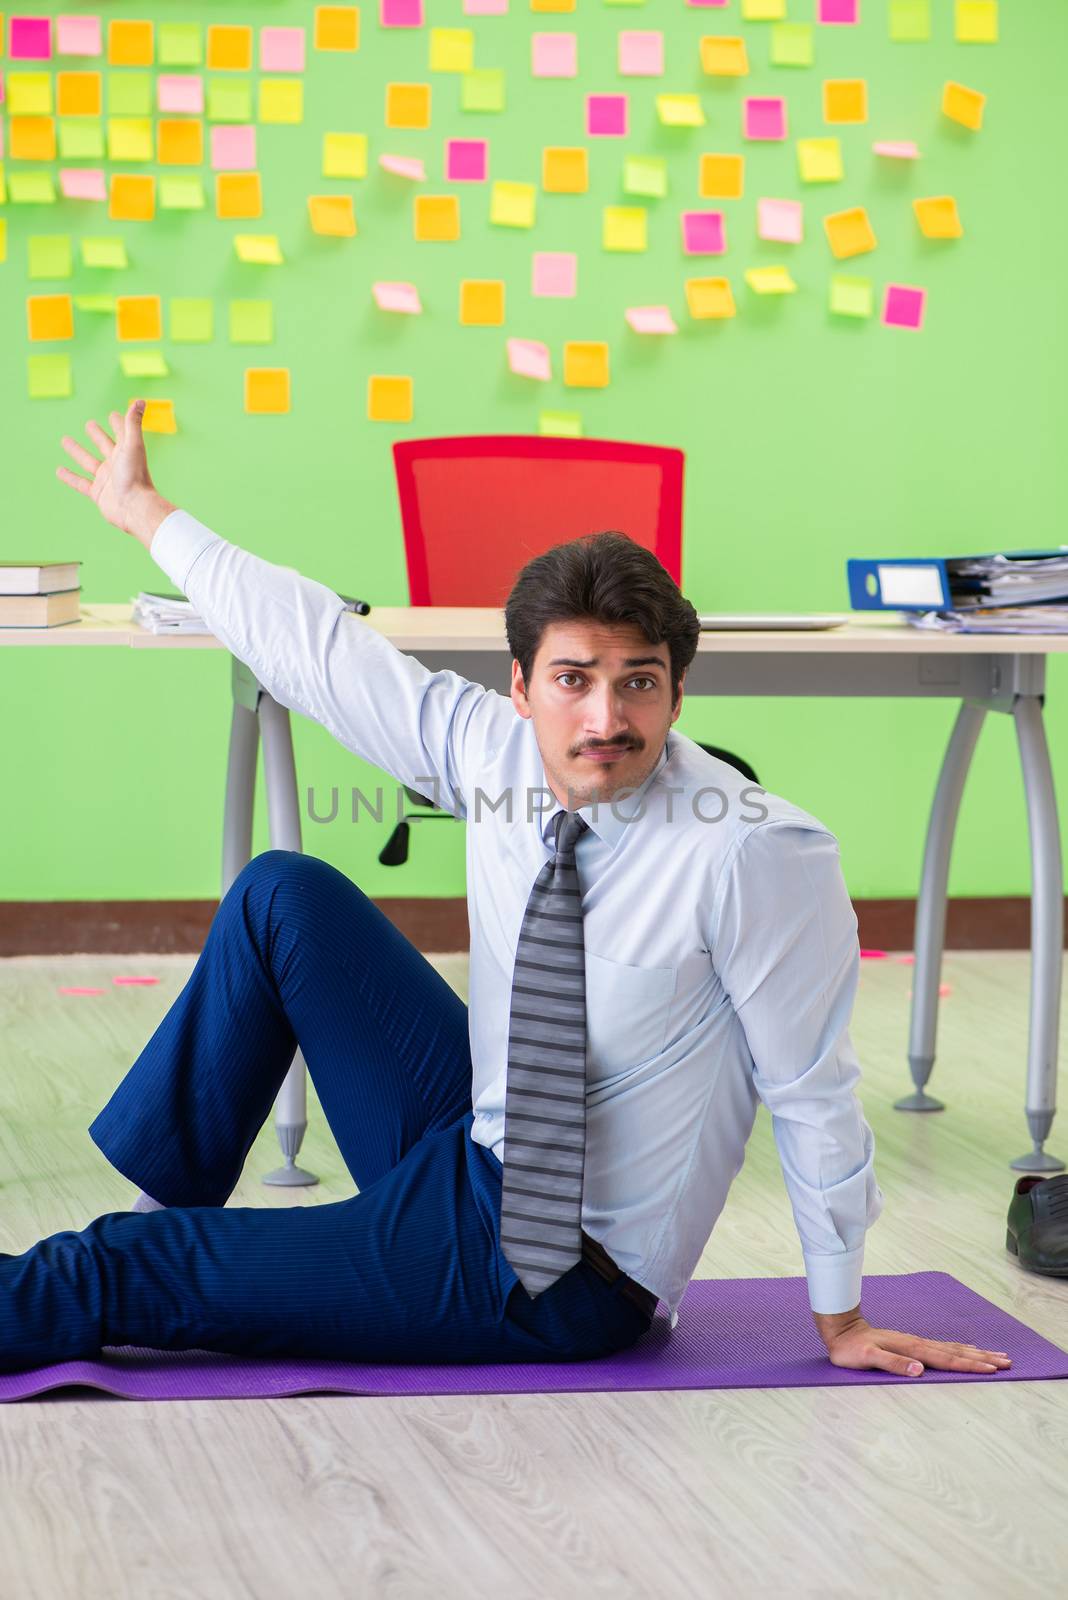 Man in the office with many conflicting priorities doing exercises